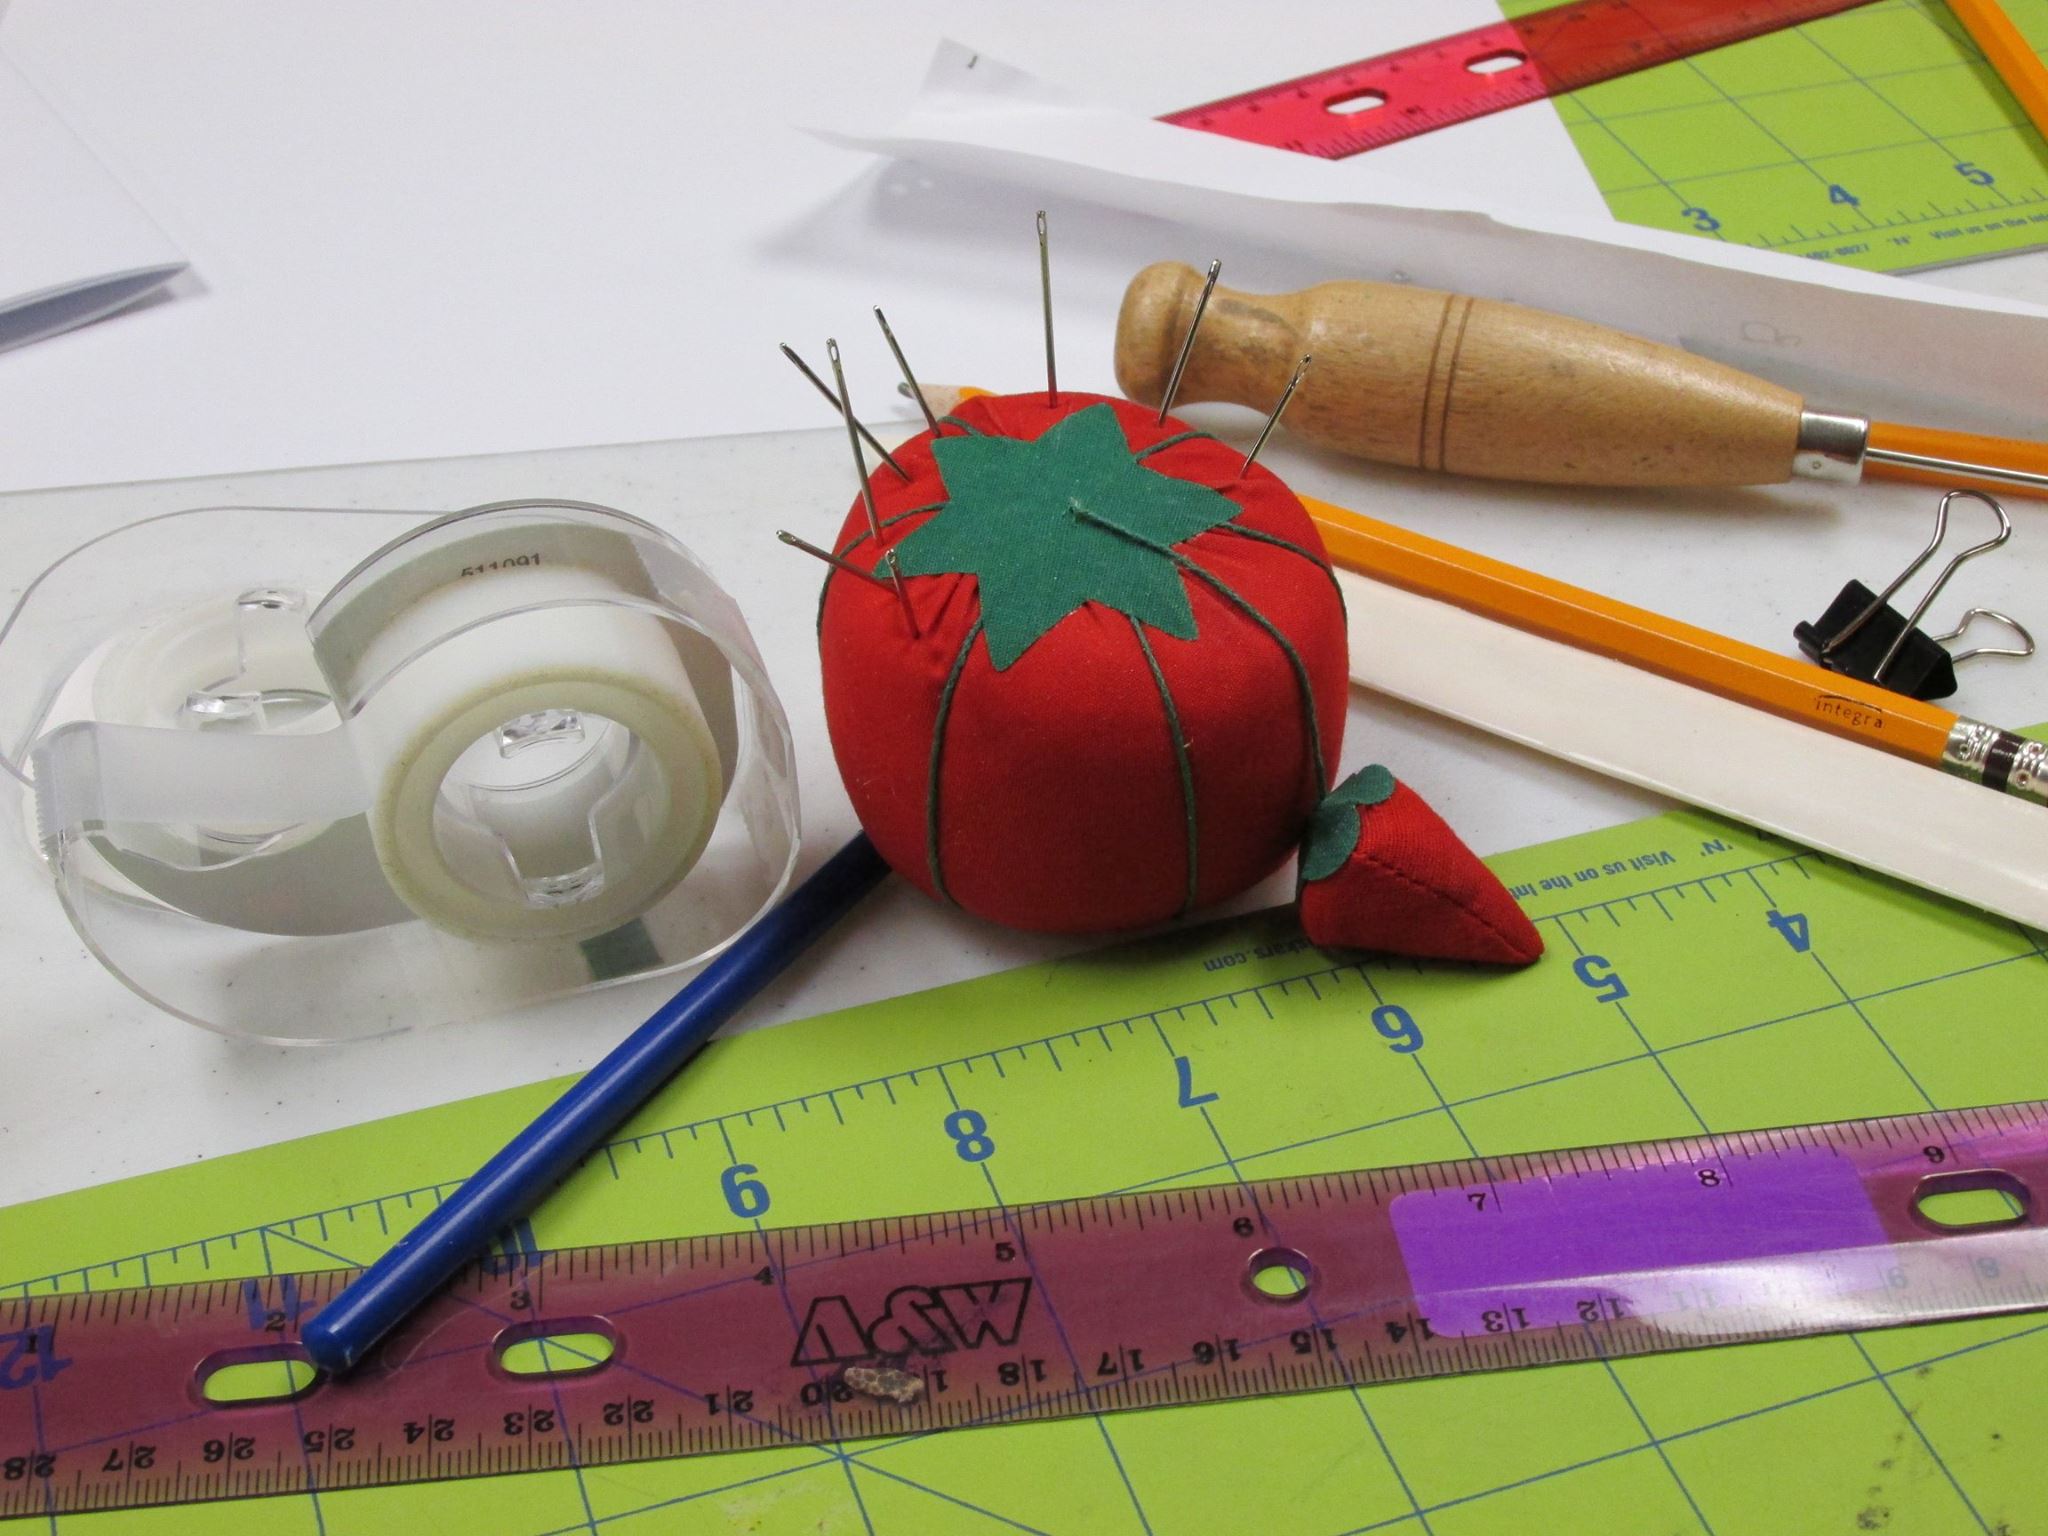 pincushion, ruler, tape and assorted crafting tools